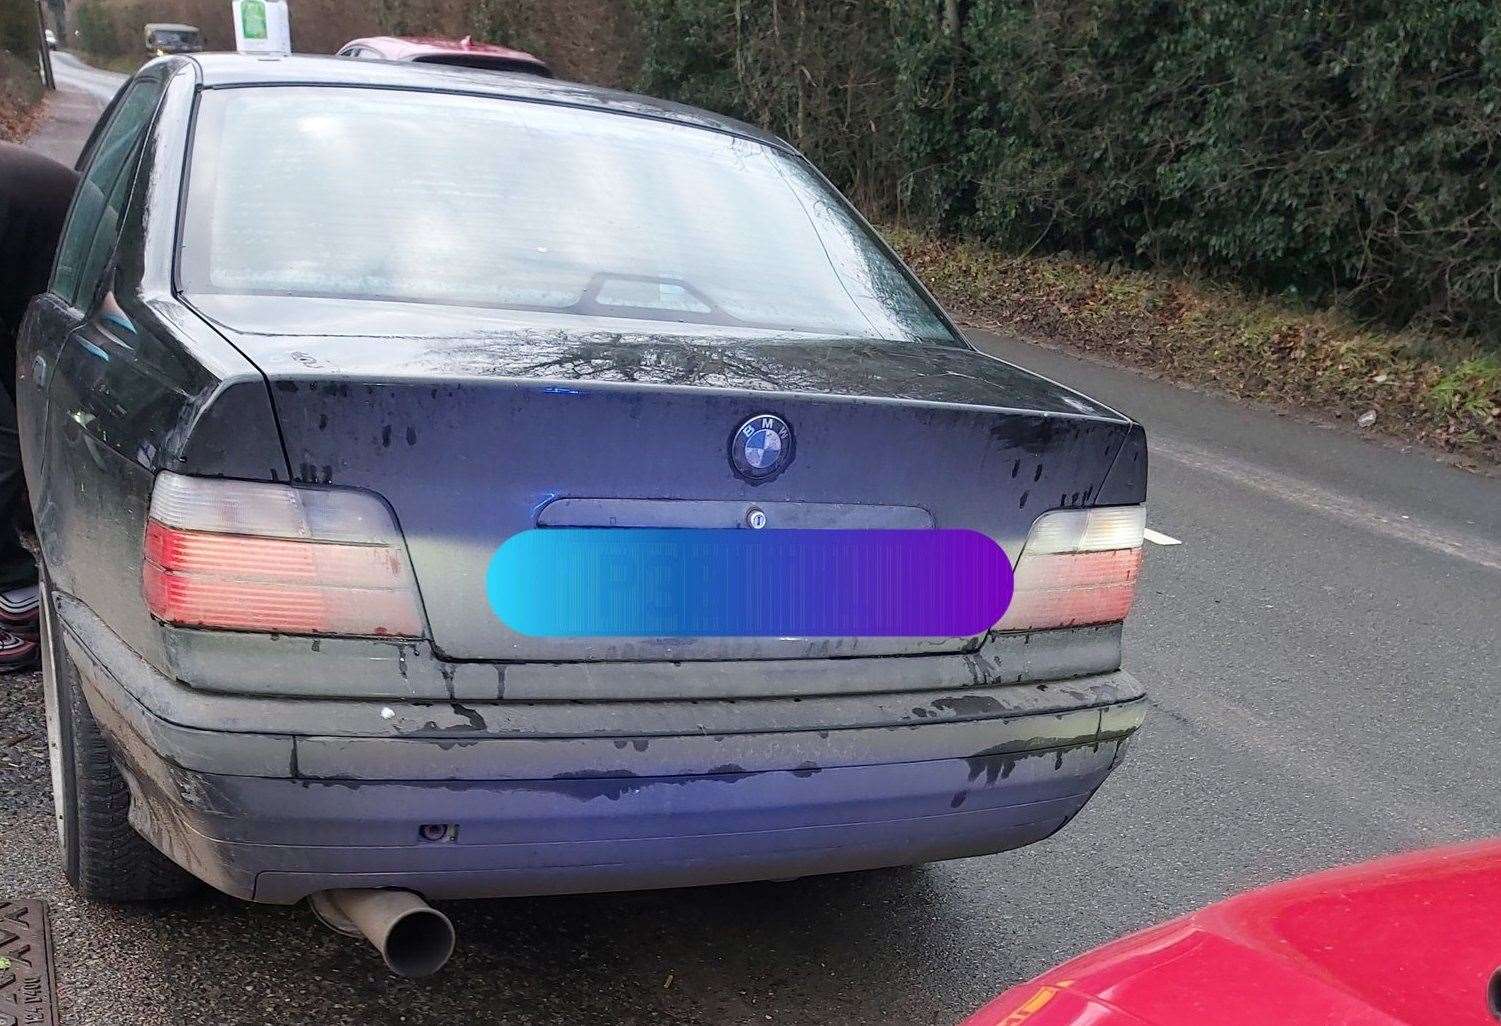 The BMW that was stopped and seized in Leeds, near Maidstone. Picture: @KentPoliceRoads